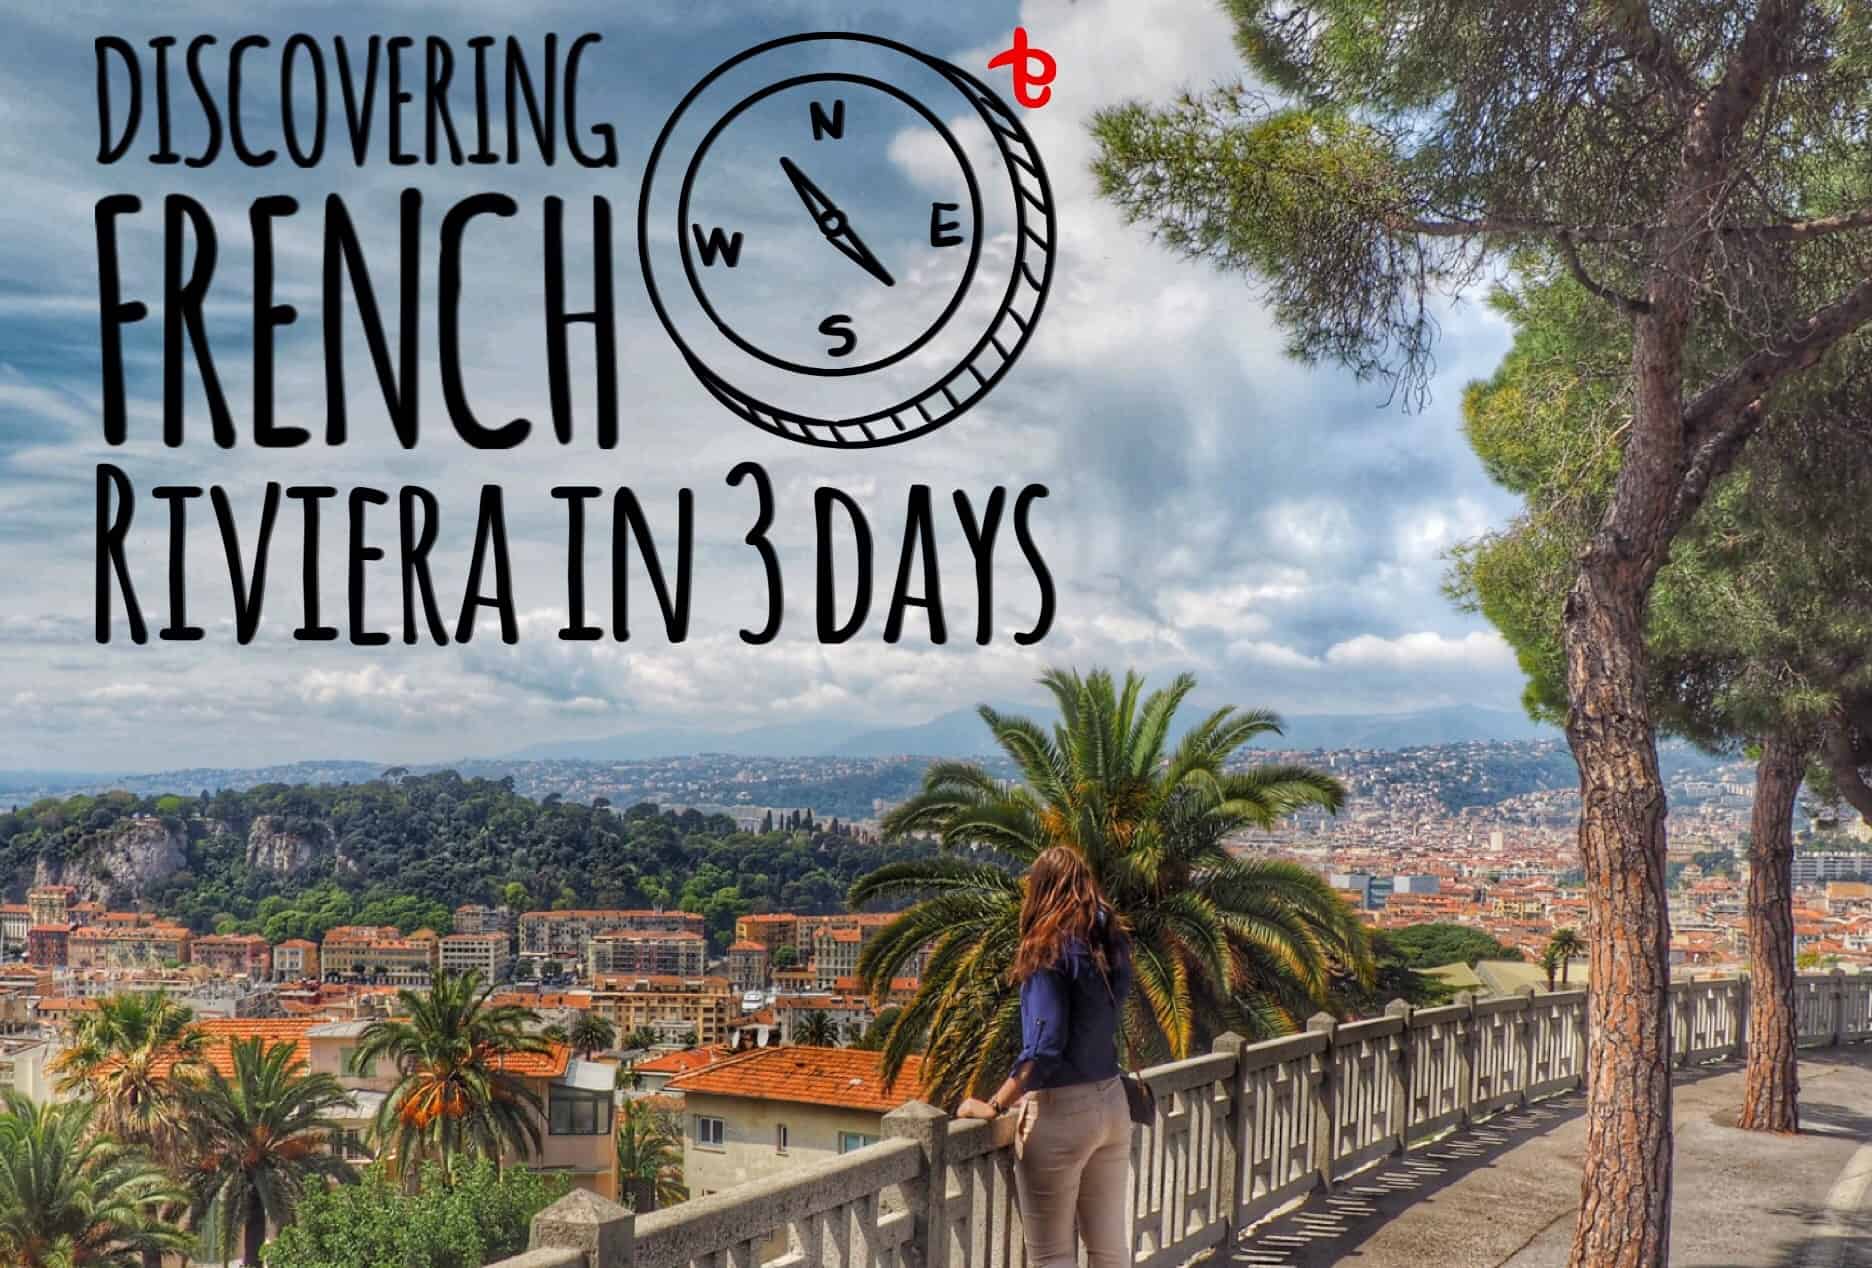 French Riviera in 3 days: visit Nice, Cannes, St. Tropez, Monaco and St. Paul de Vence